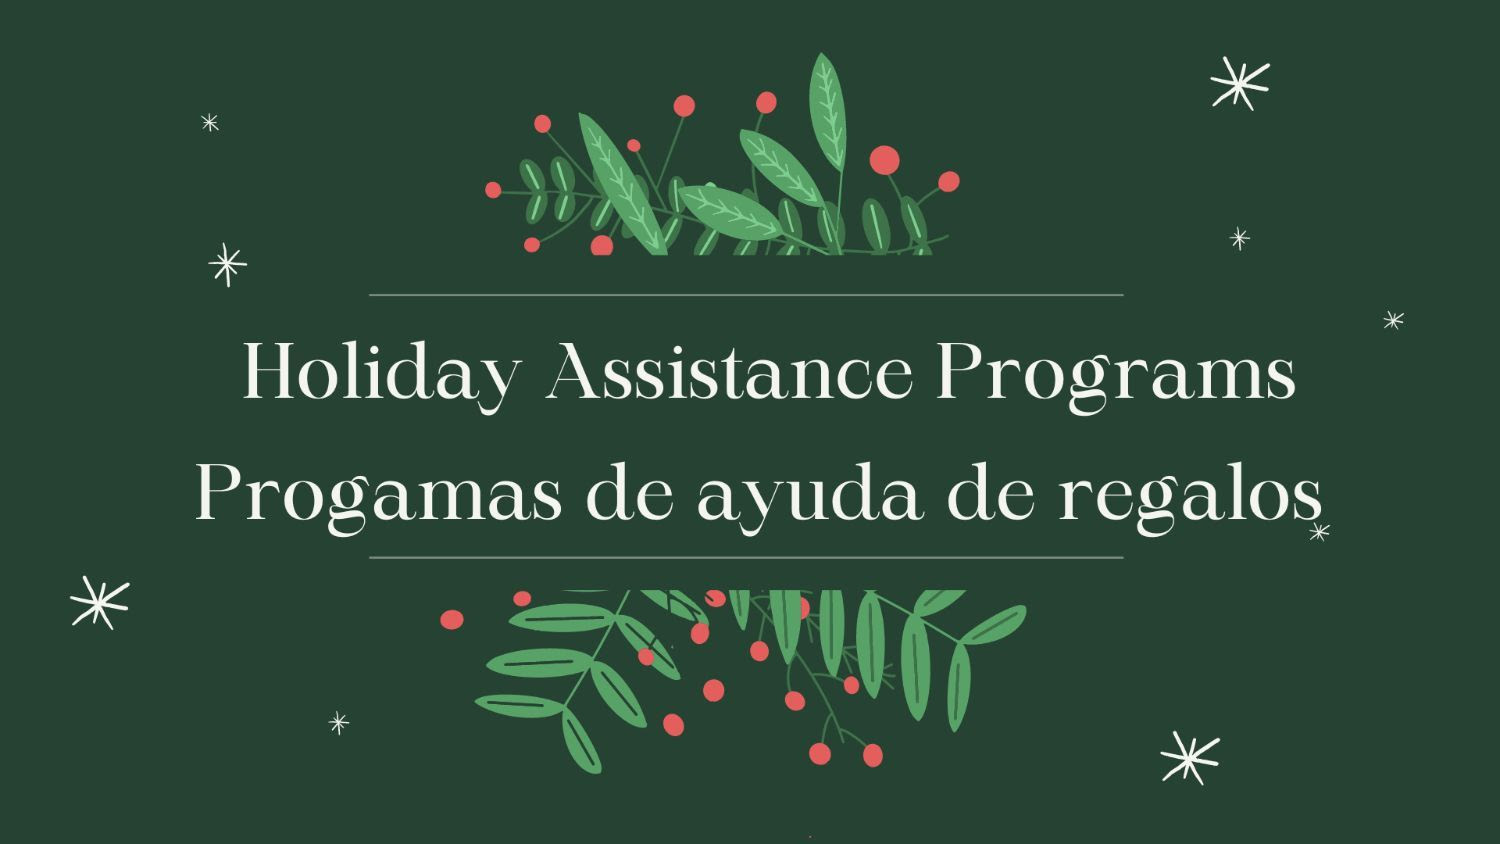 Holiday Assistance Programs Image